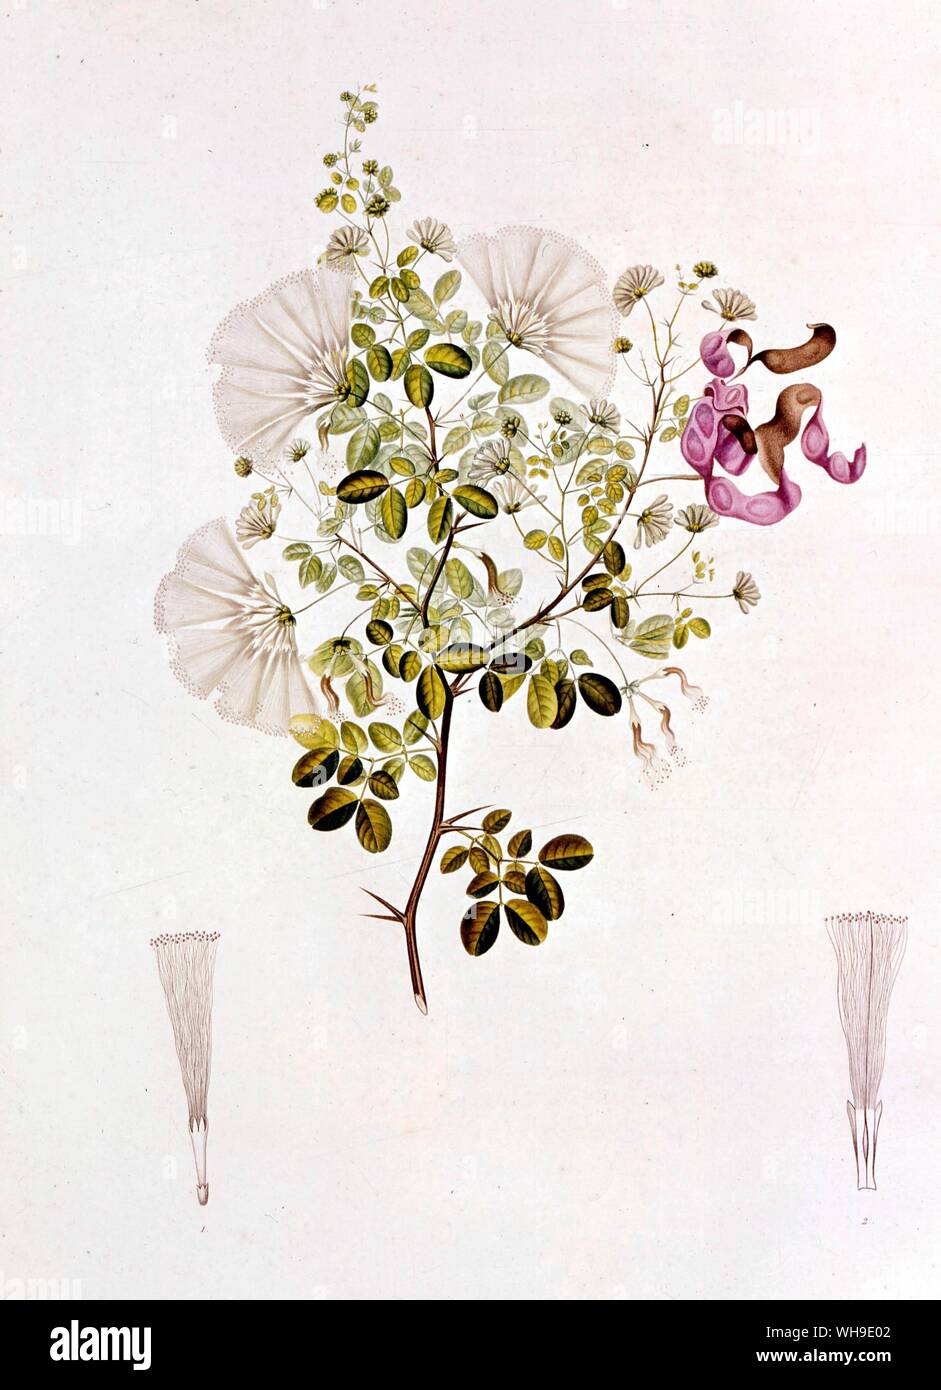 Humboldt and Bonpland brought 60,000 plant specimens back to Paris from Spanish America, many of which were later illustrated in 17 lavish volumes. Inga excelsa appeared in a volume devoted to Mimosas and other leguminous plants. Stock Photo